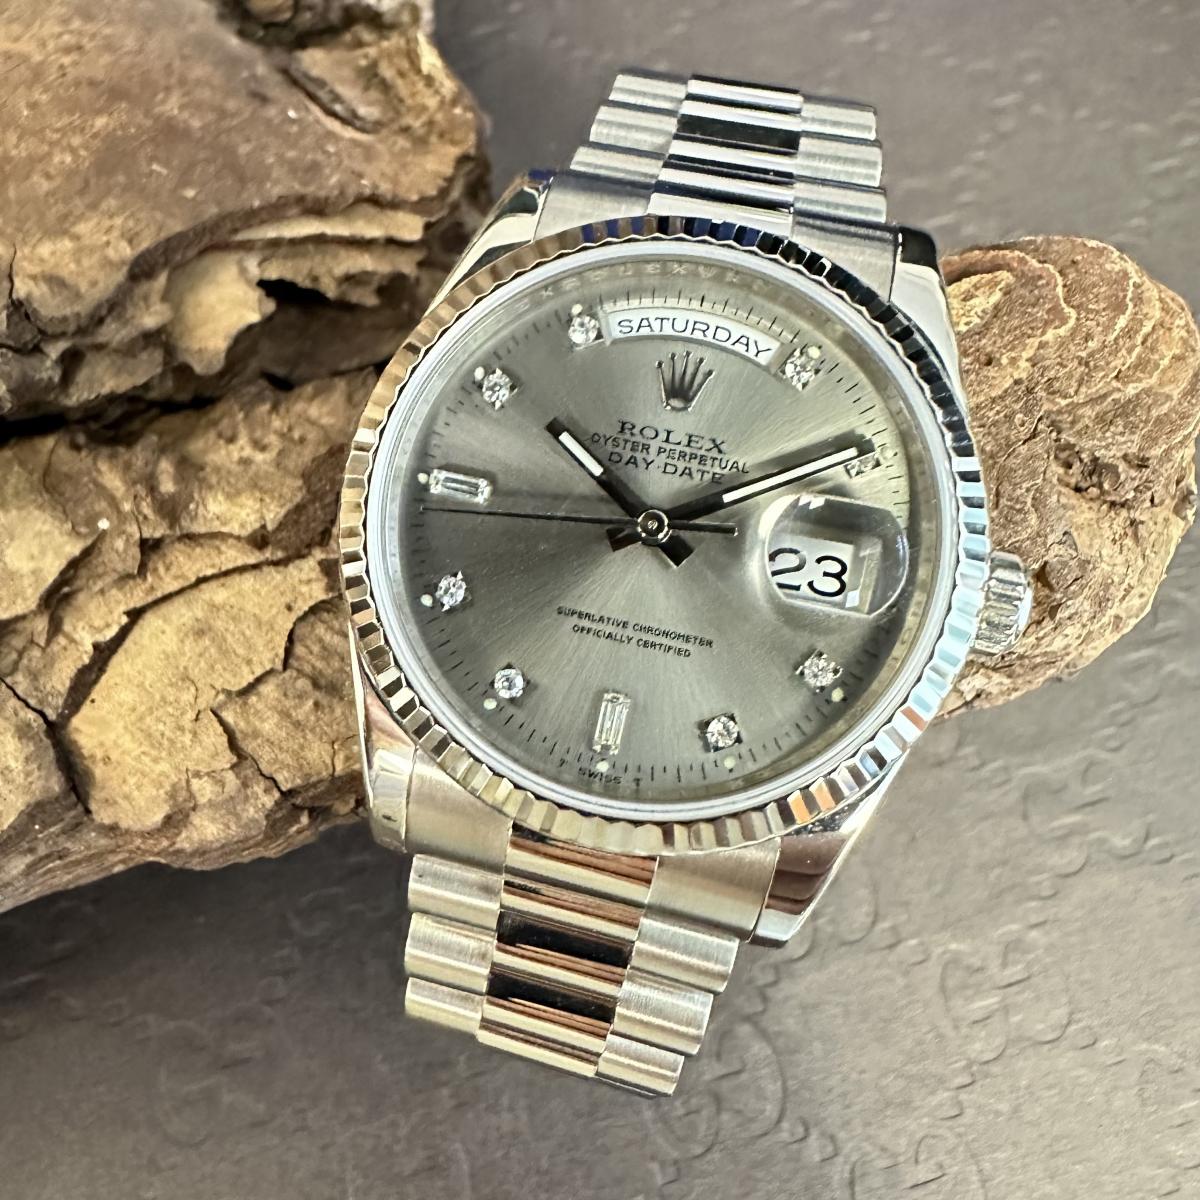 Rolex Oyster Perpetual Day-Date 36  Diamant - Ref. 118239 - FULL-SET 2013